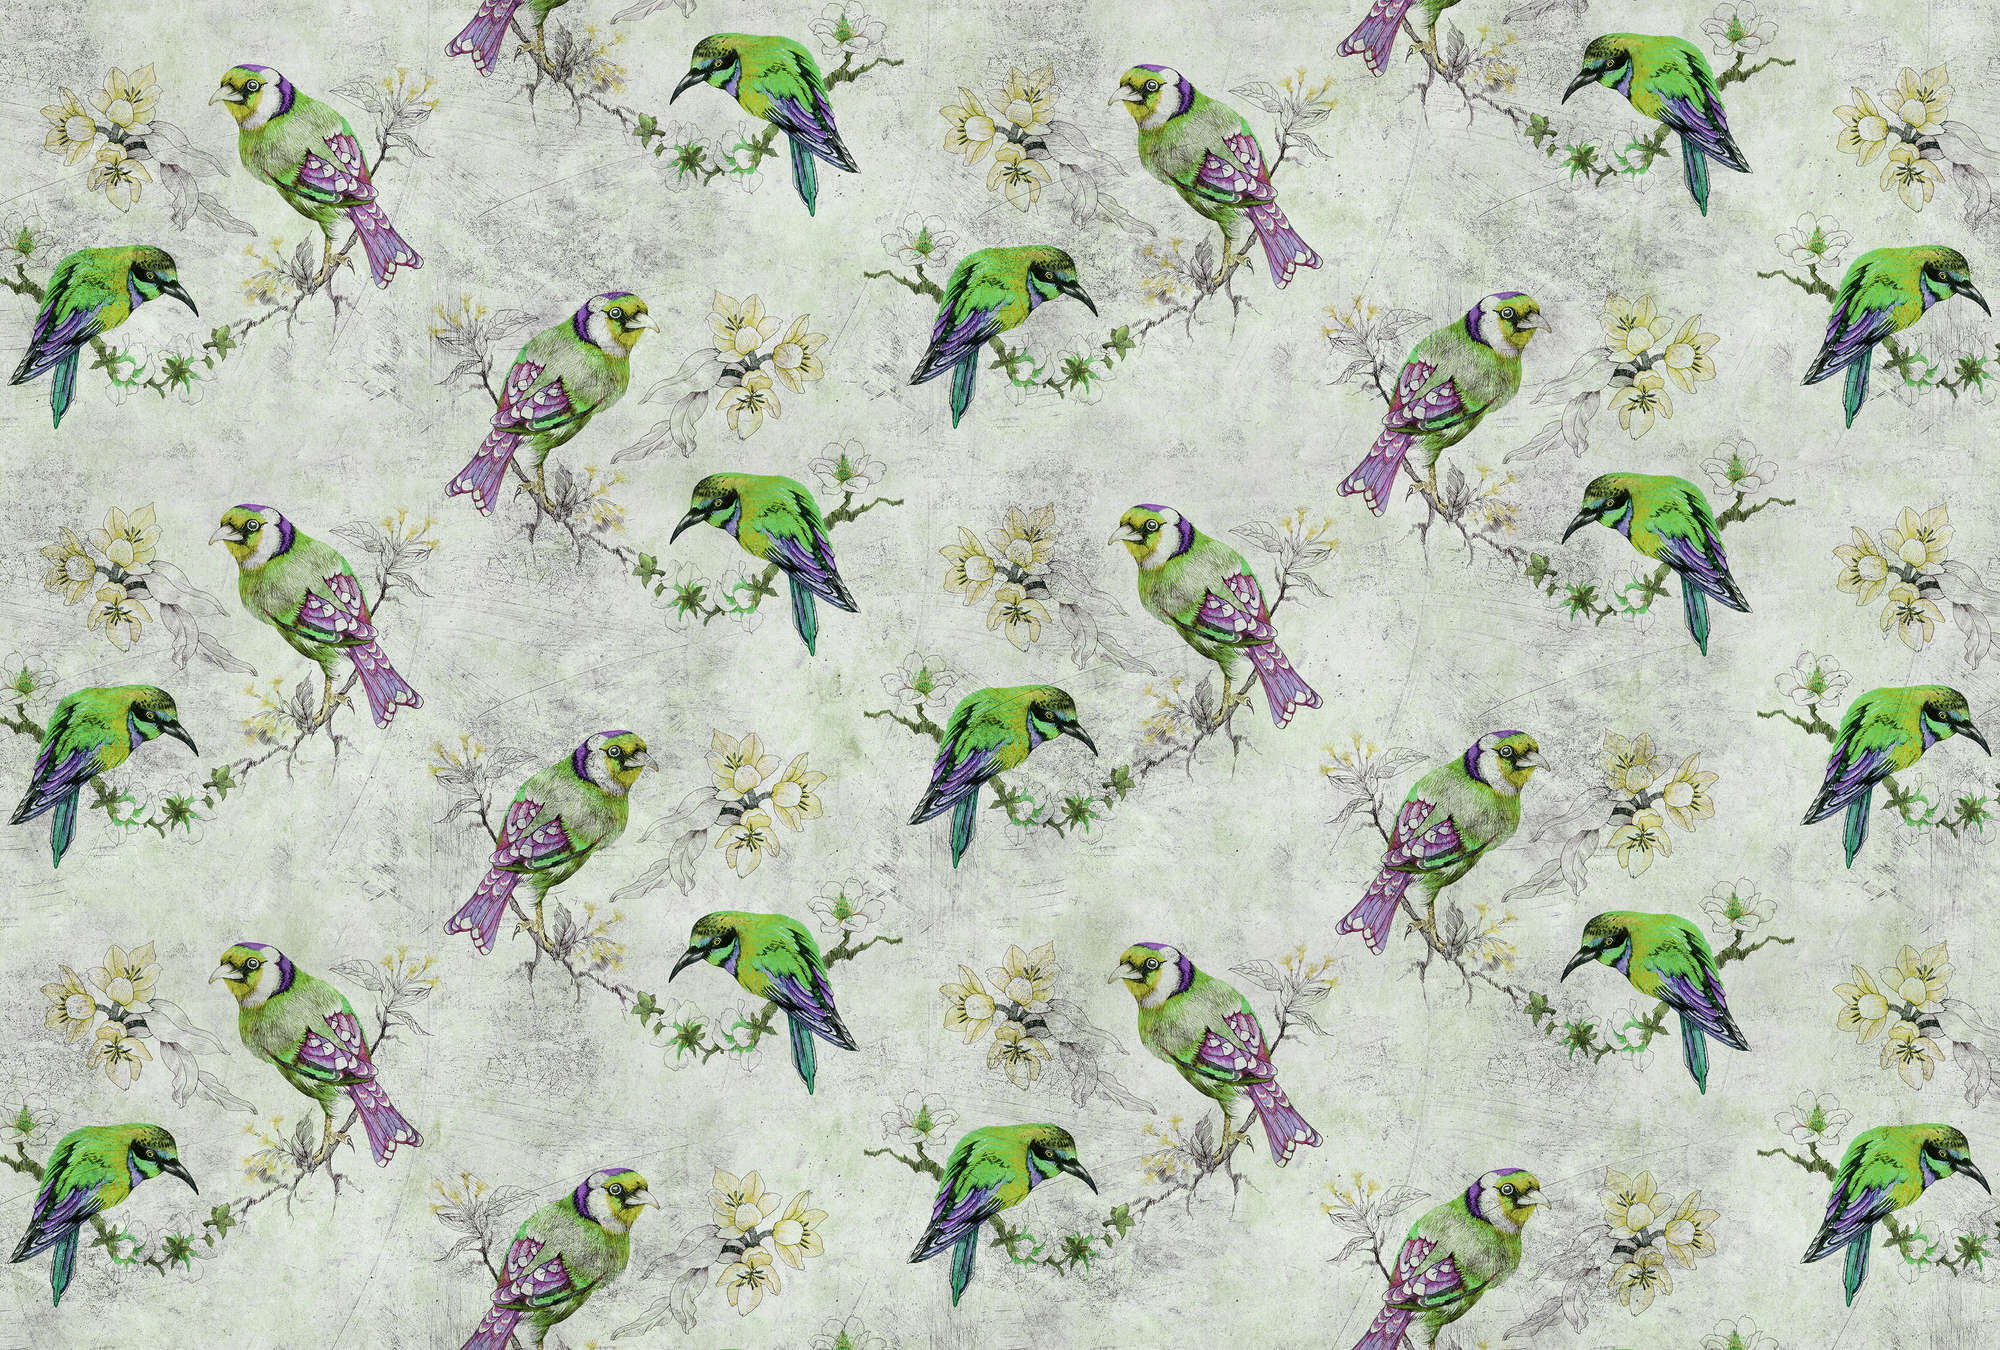             Love birds 2 - Colourful photo wallpaper in scratchy structure with sketched birds - Grey, Green | Matt smooth fleece
        